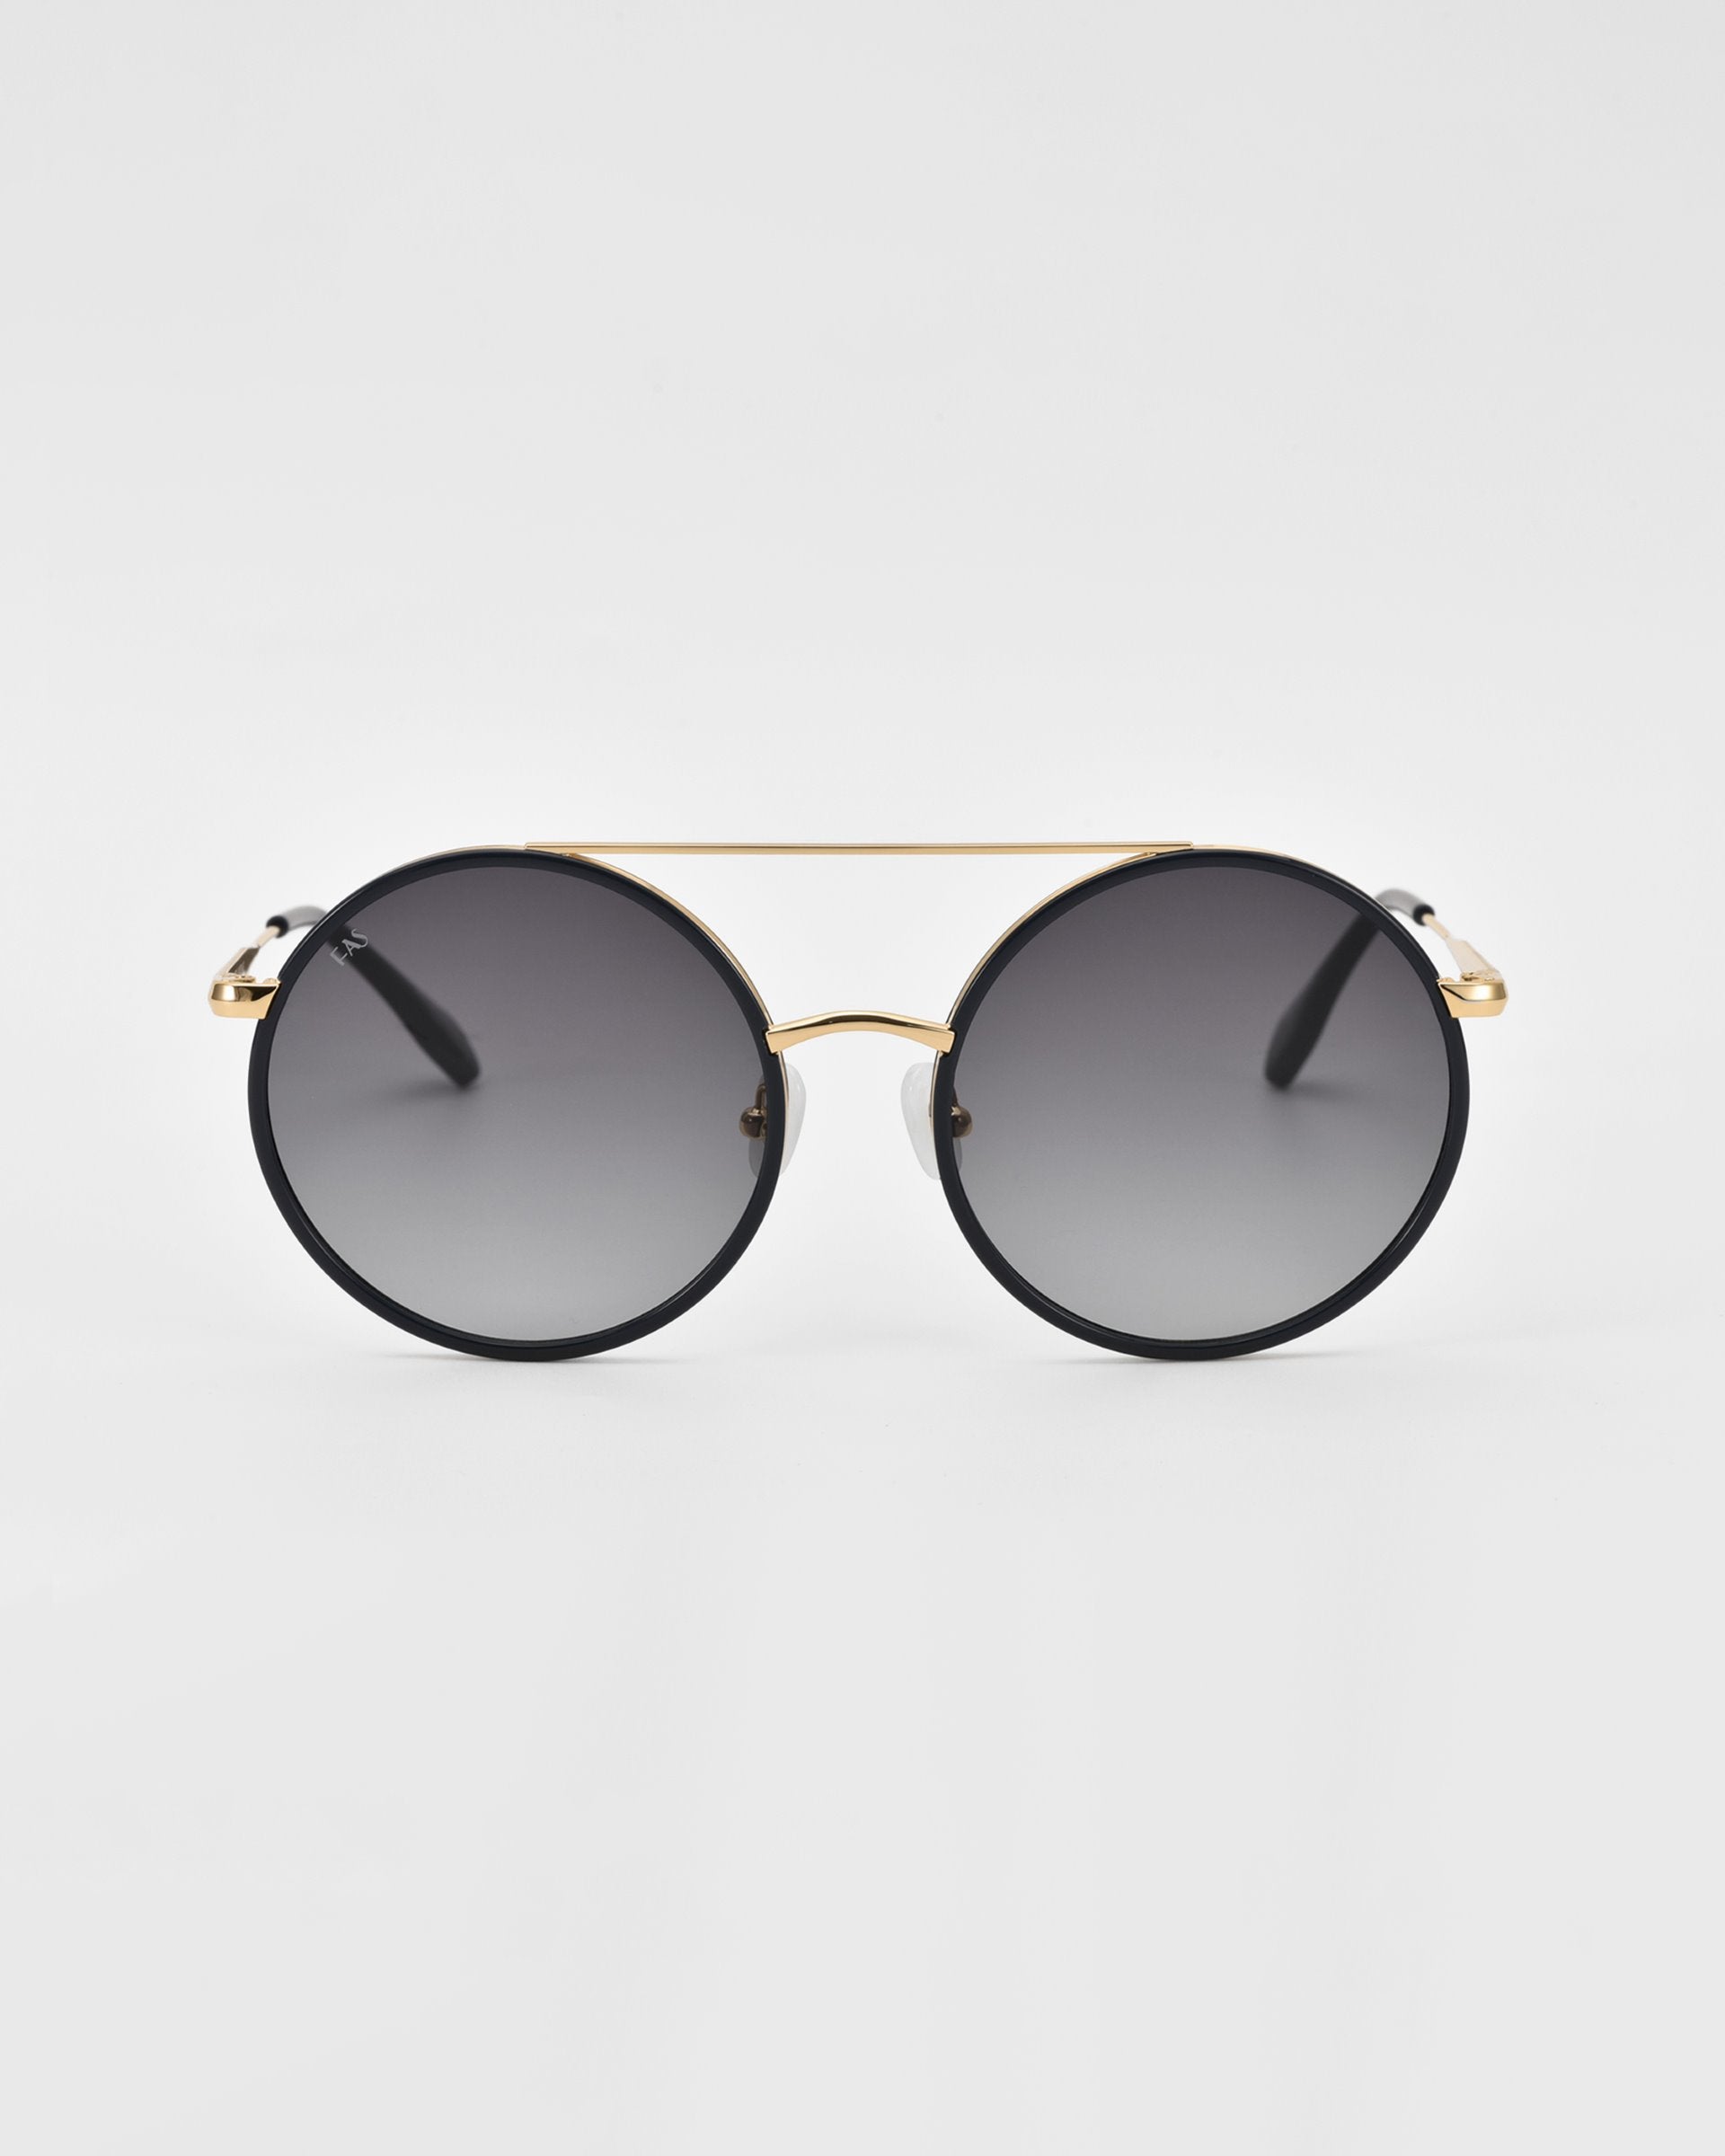 A pair of For Art&#39;s Sake® Orb oversized round aviator sunglasses with dark gradient lenses and a thin gold frame. The design features a distinct double bridge and black arms with gold accents at the hinges, complemented by jade-stone nose pads. The background is plain white, highlighting the stylish and modern design.